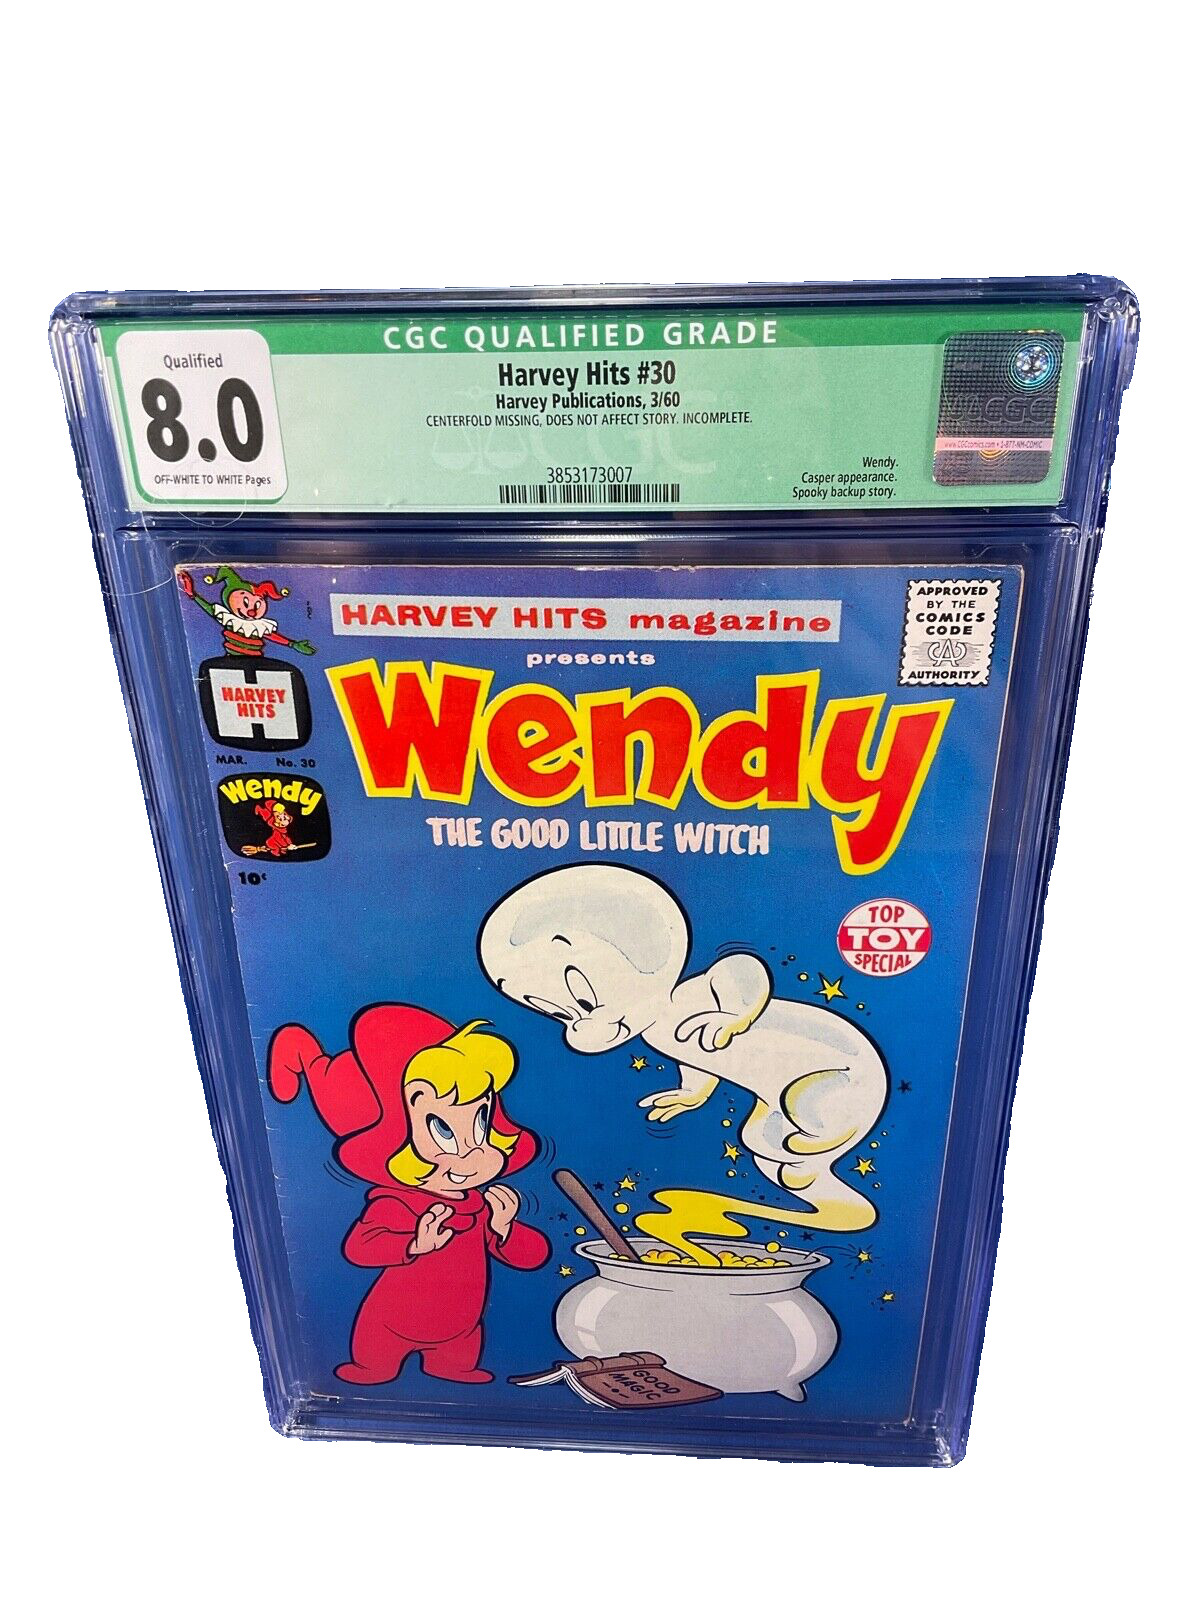 Harvey Hits  Comics #30, Wendy ~The Good Little Witch, Mar 1960, CGC. 8.0